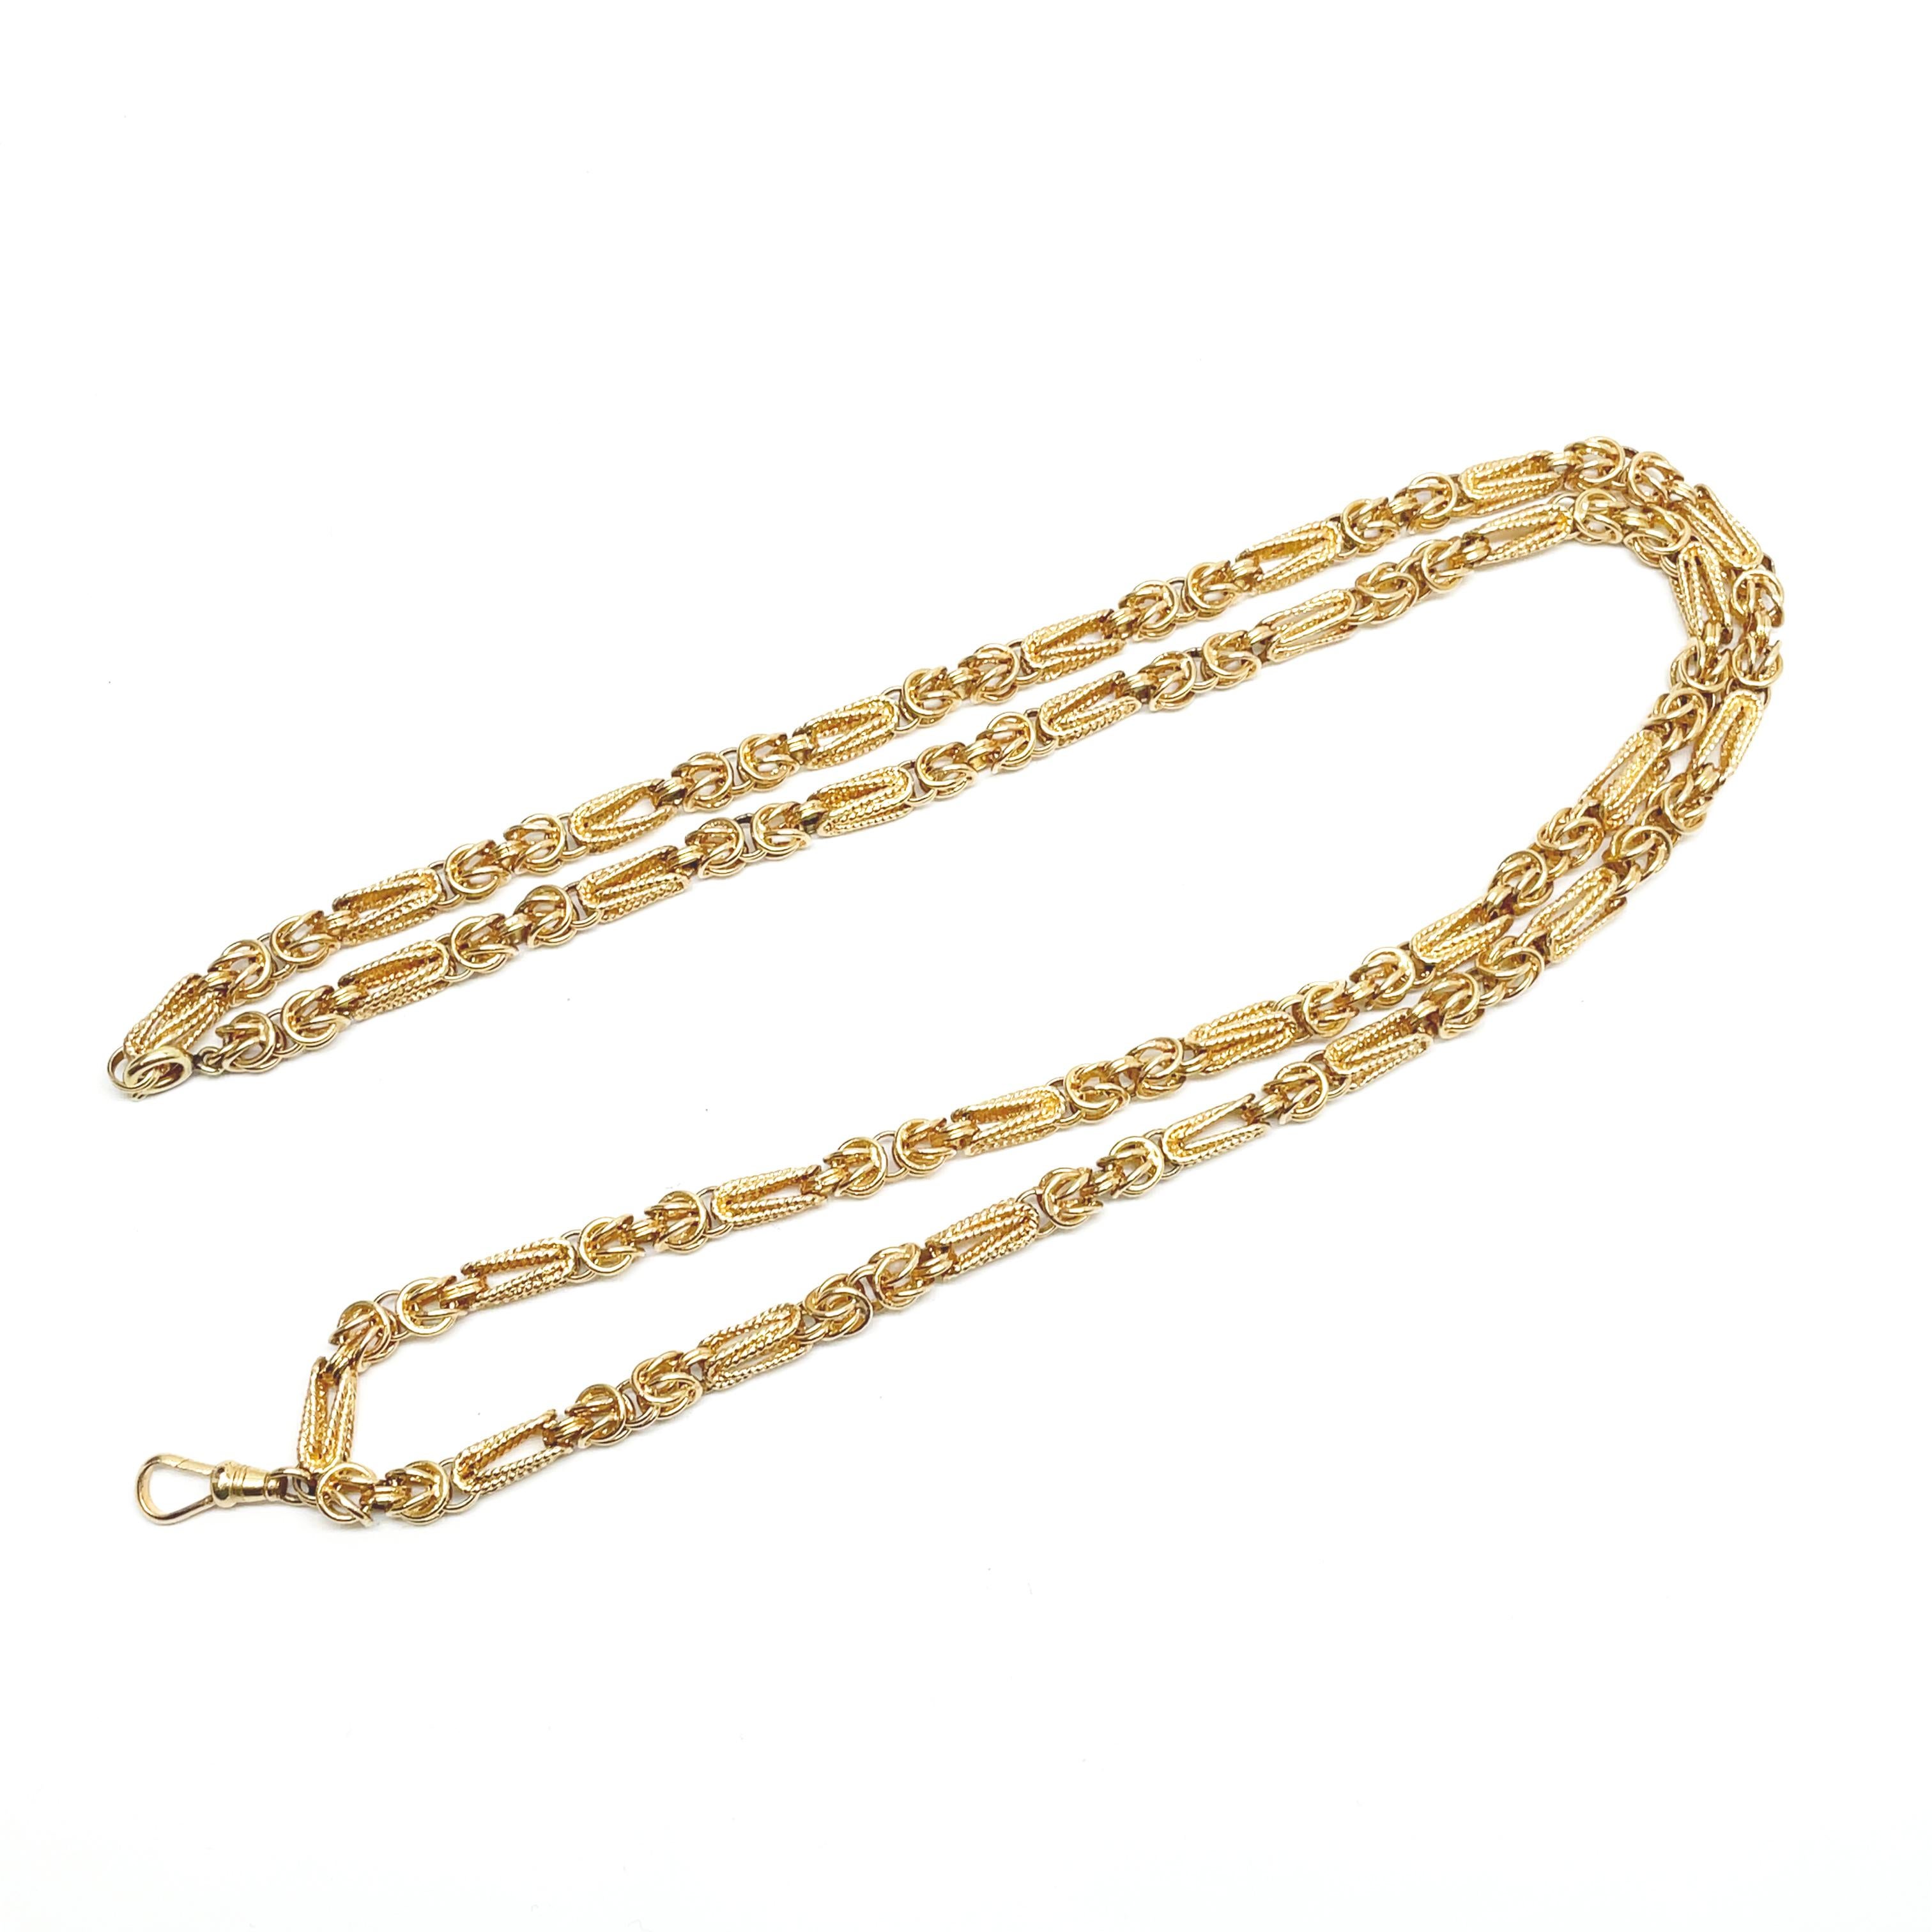 Women's or Men's 1970's Hand-Crafted Long Yellow Gold Chain